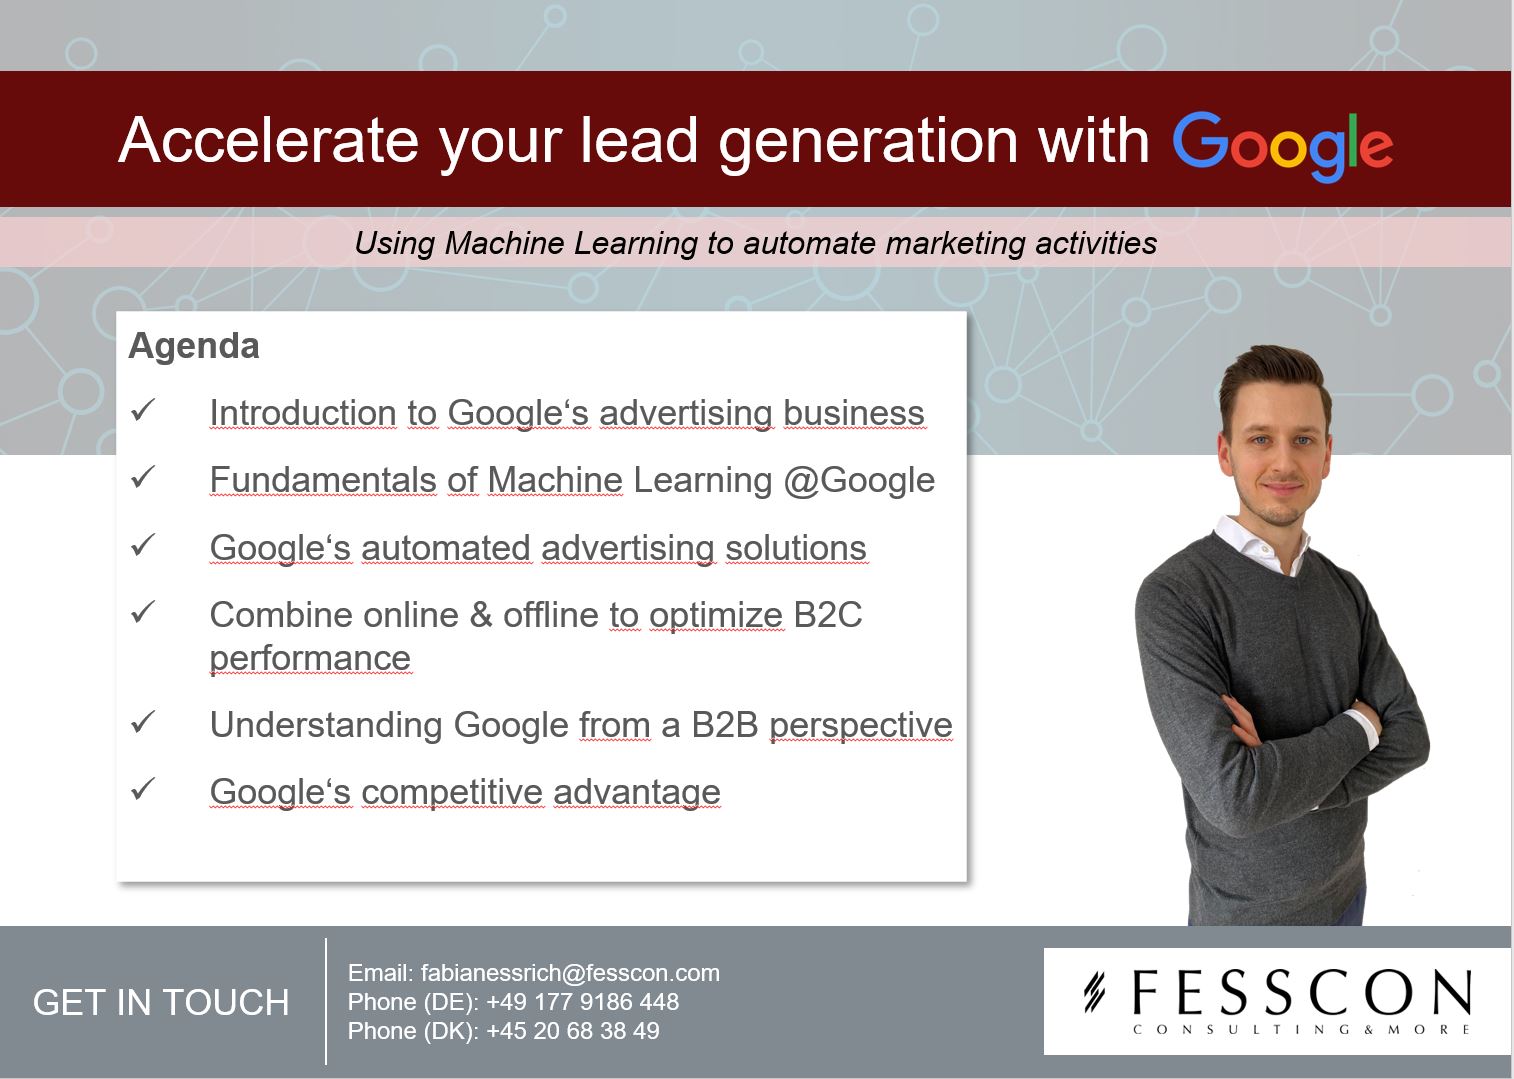 Accelerating Lead Generation with Google